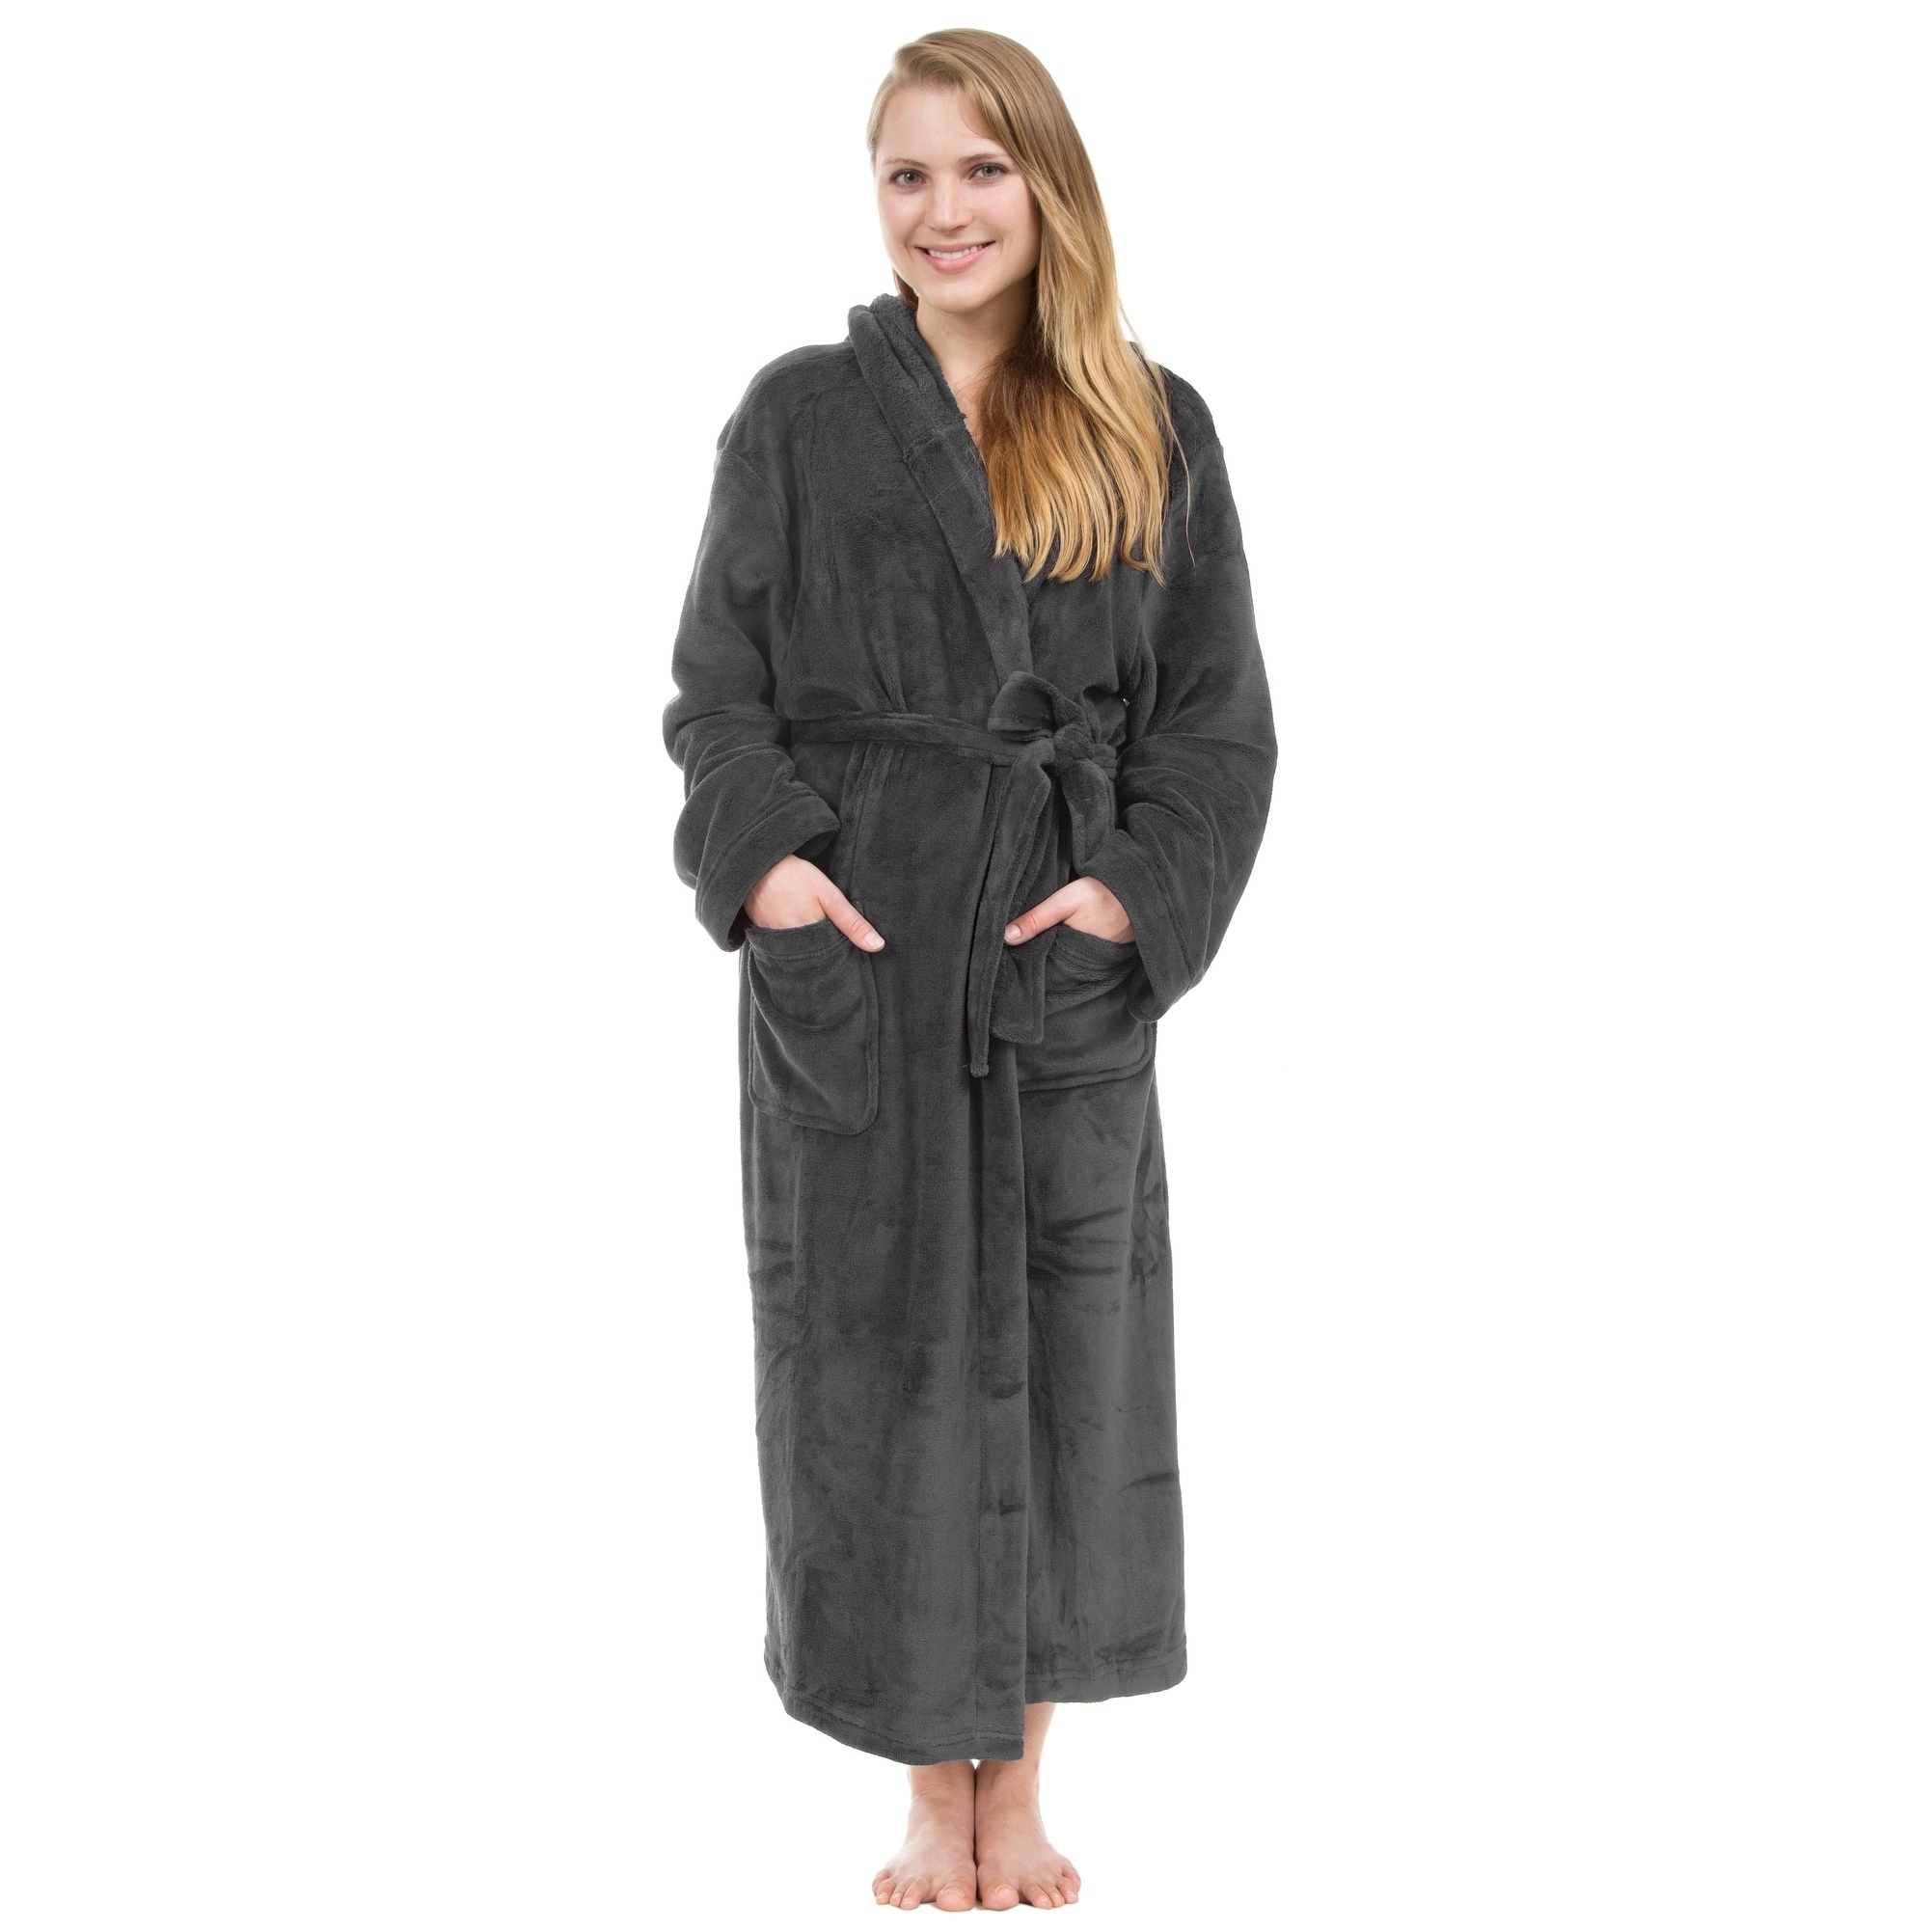 https://ak1.ostkcdn.com/images/products/24184966/Hooded-Plush-Fleece-Robe-6dc890c0-2d8d-463c-938c-1c74a2ba9e4e.jpg